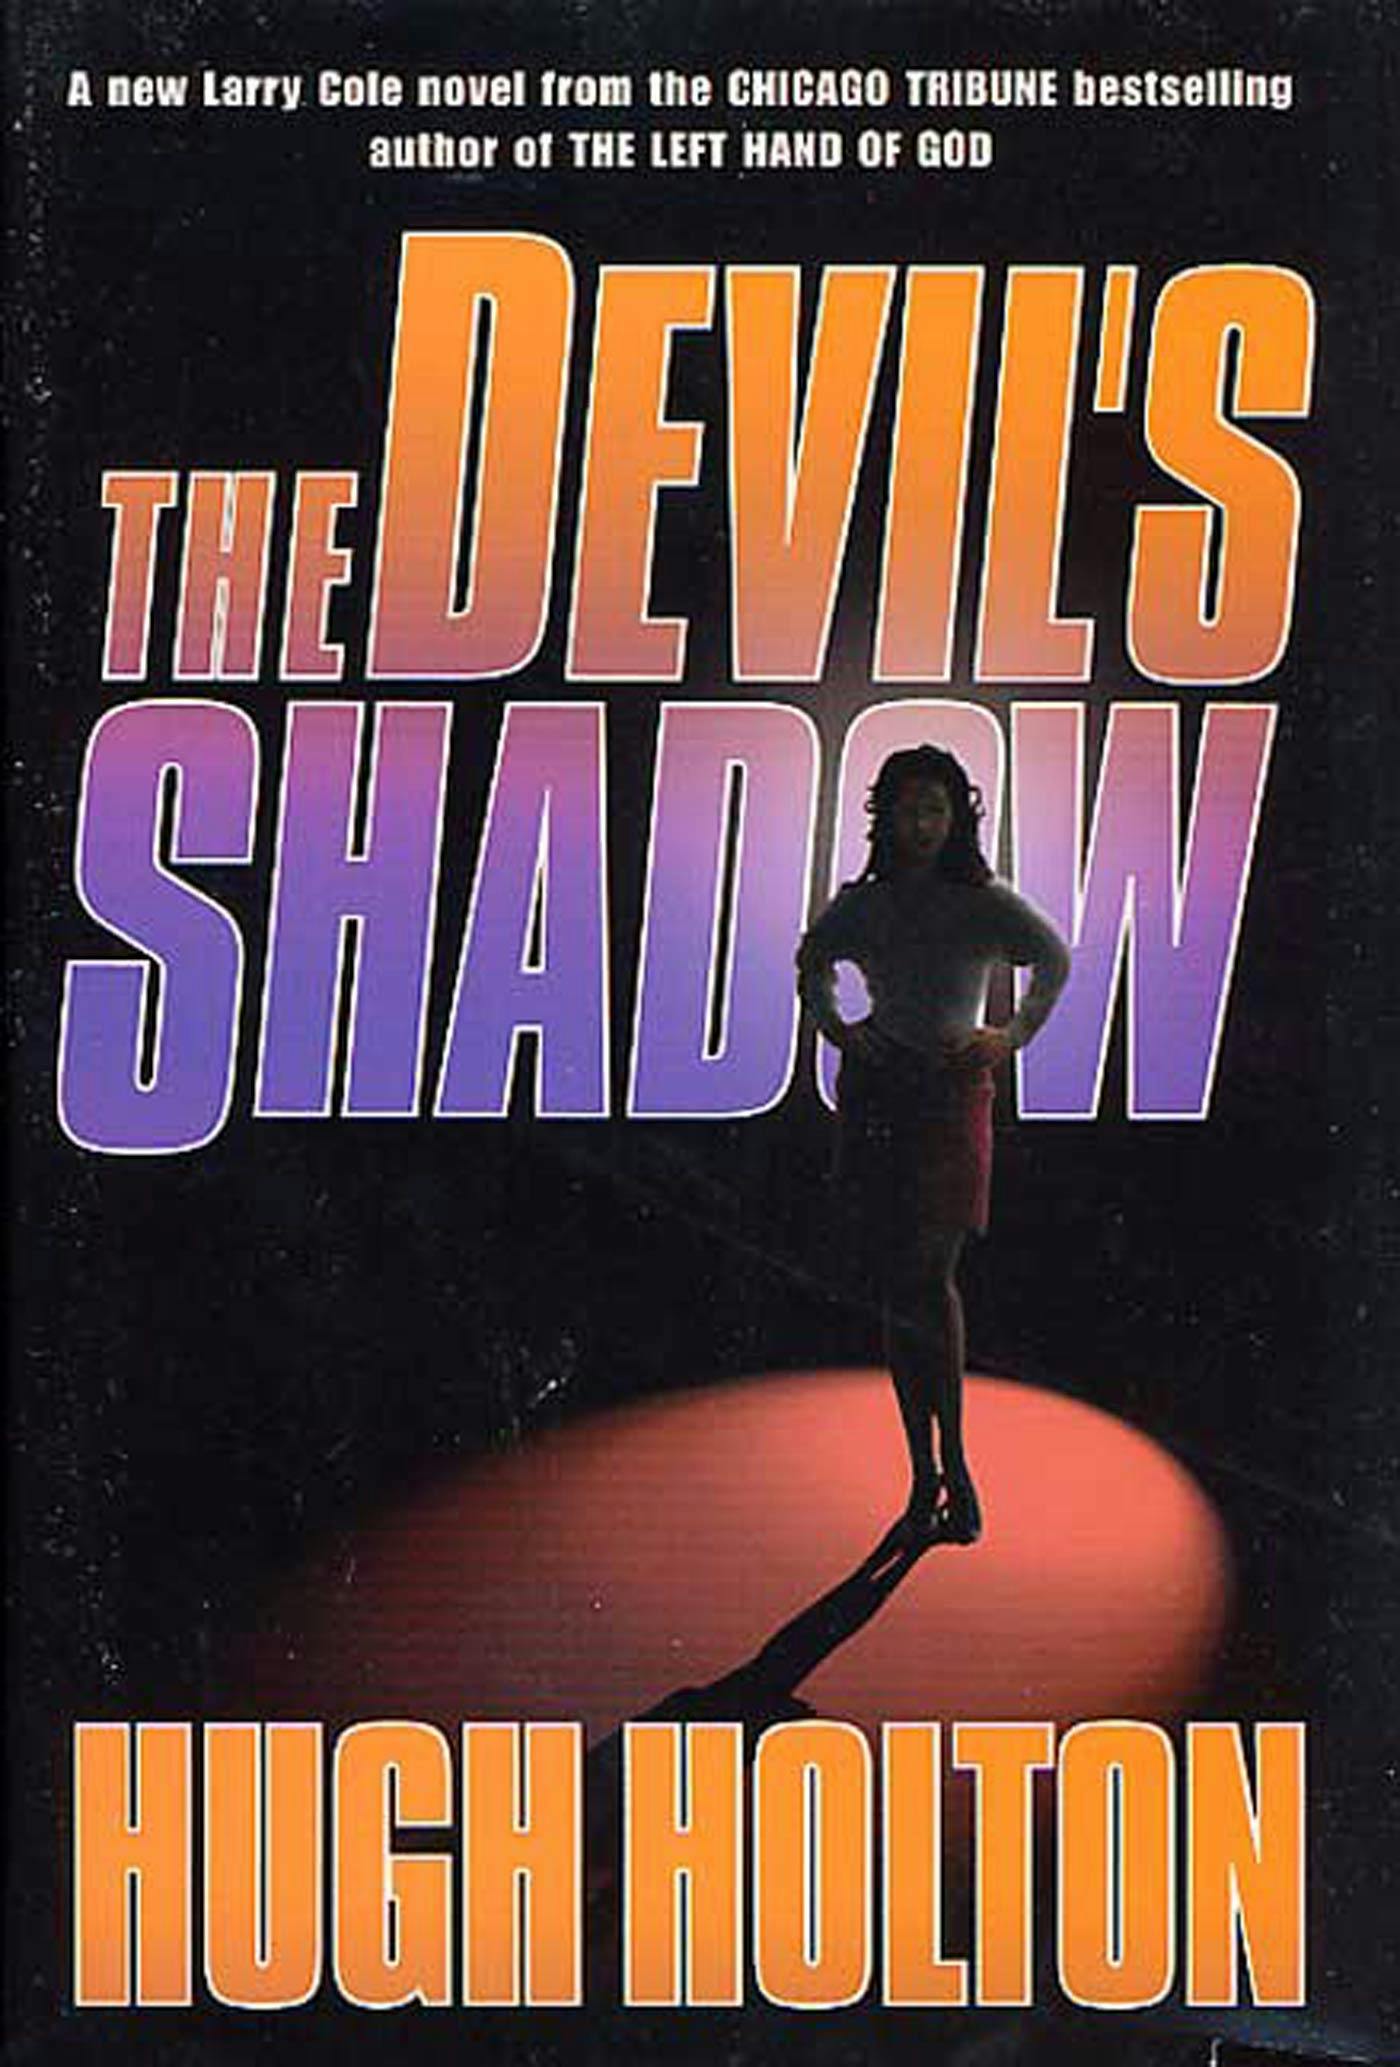 Cover for the book titled as: The Devil's Shadow